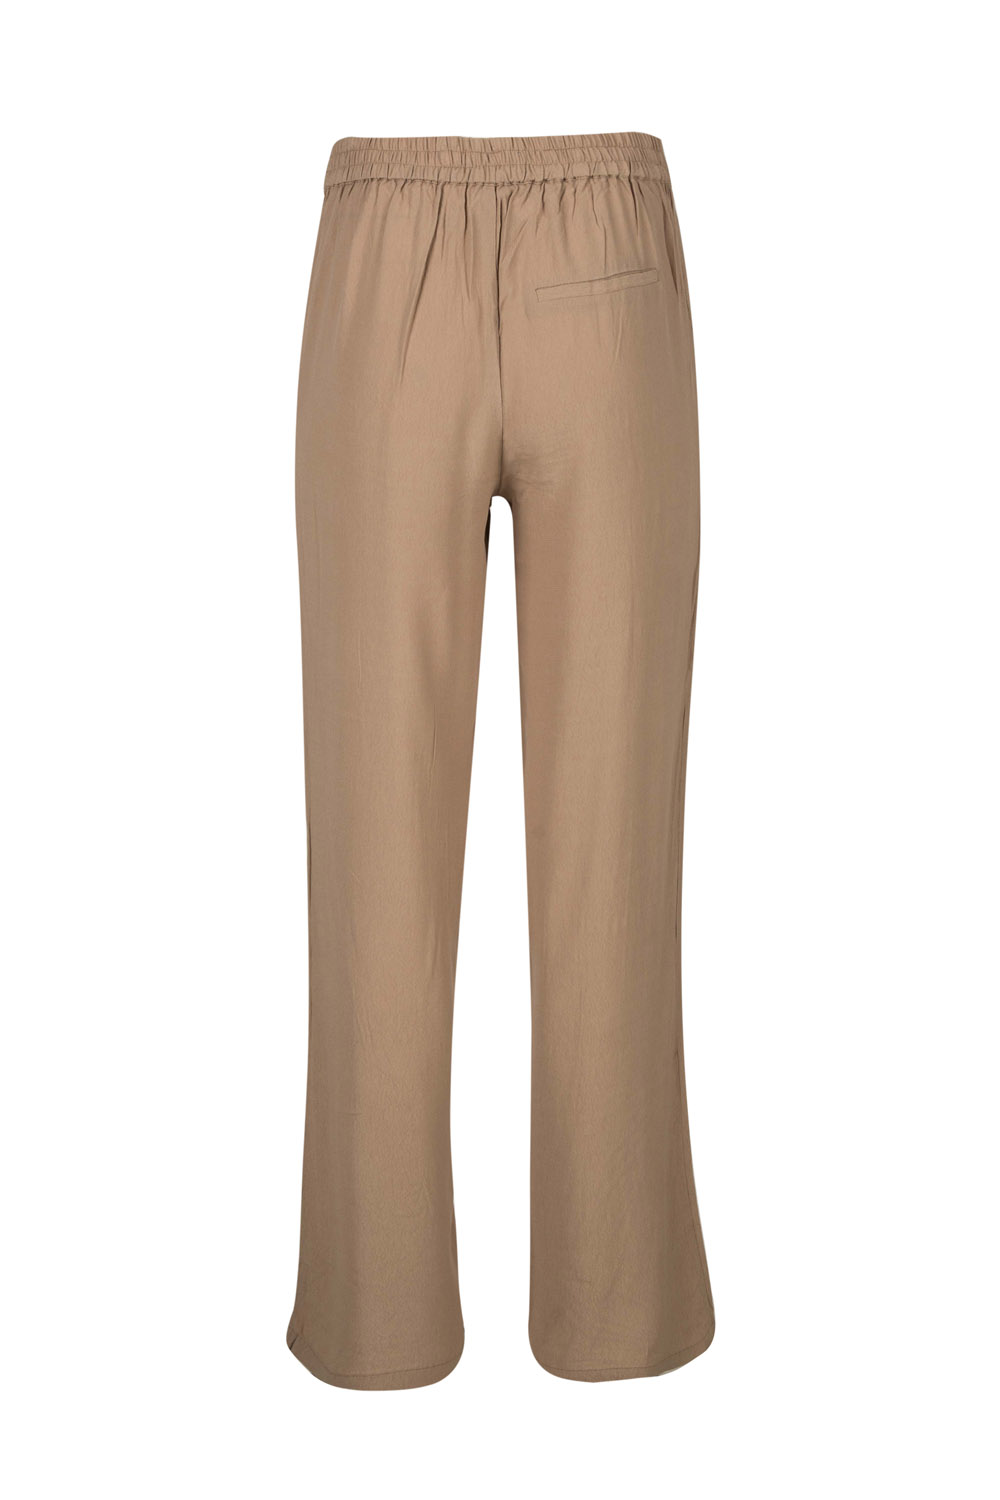 Soft Wide Legged Trousers with Elasticated Back Waistband